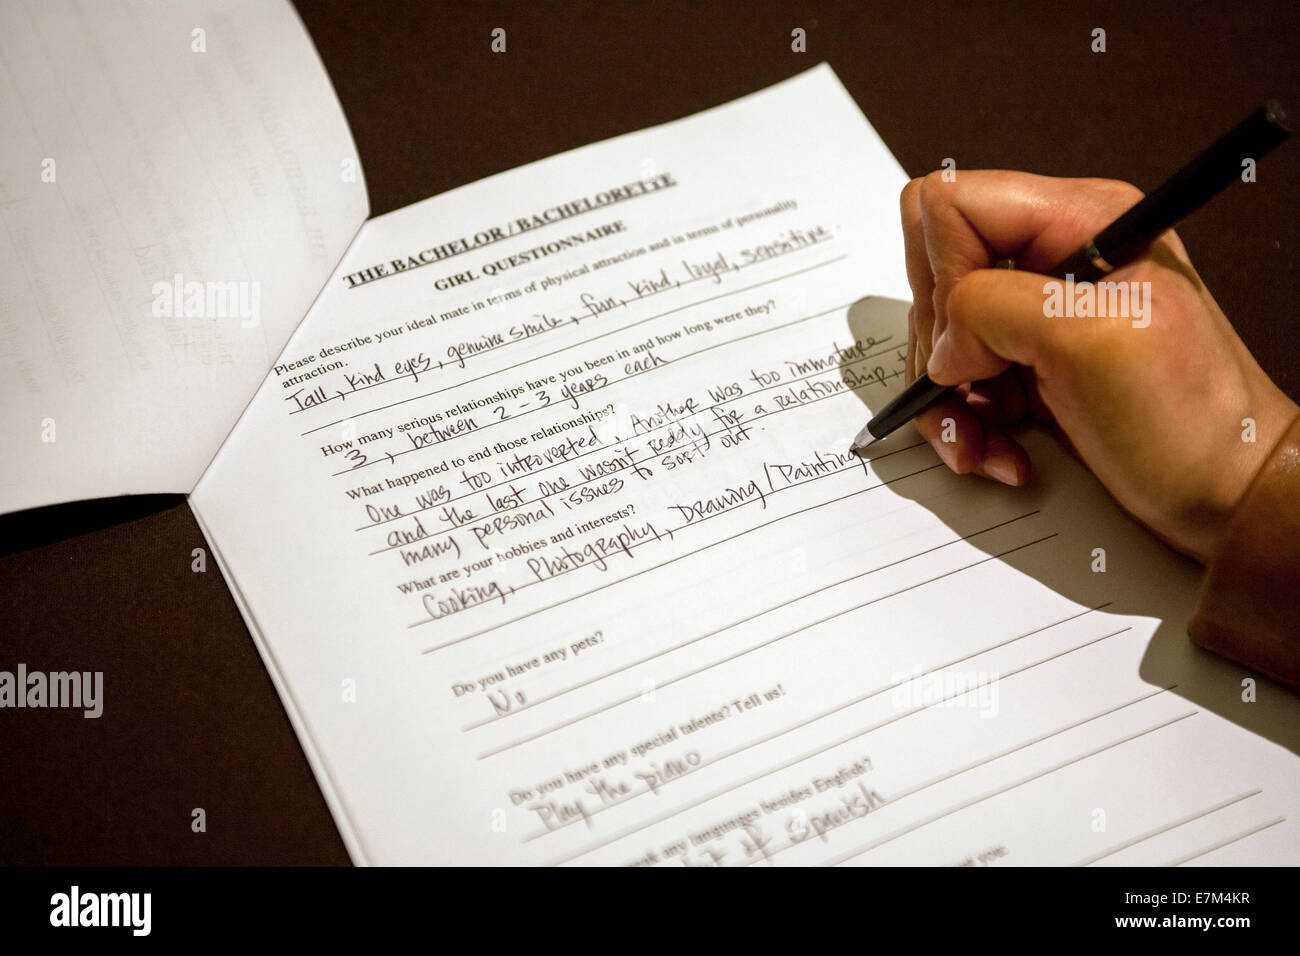 A "Bachelor/Bachelorette" questionnaire asks about past relationships at a casting call in Costa Mesa, CA, for "The Bachelor" TV show. Note question about hobbies. Stock Photo